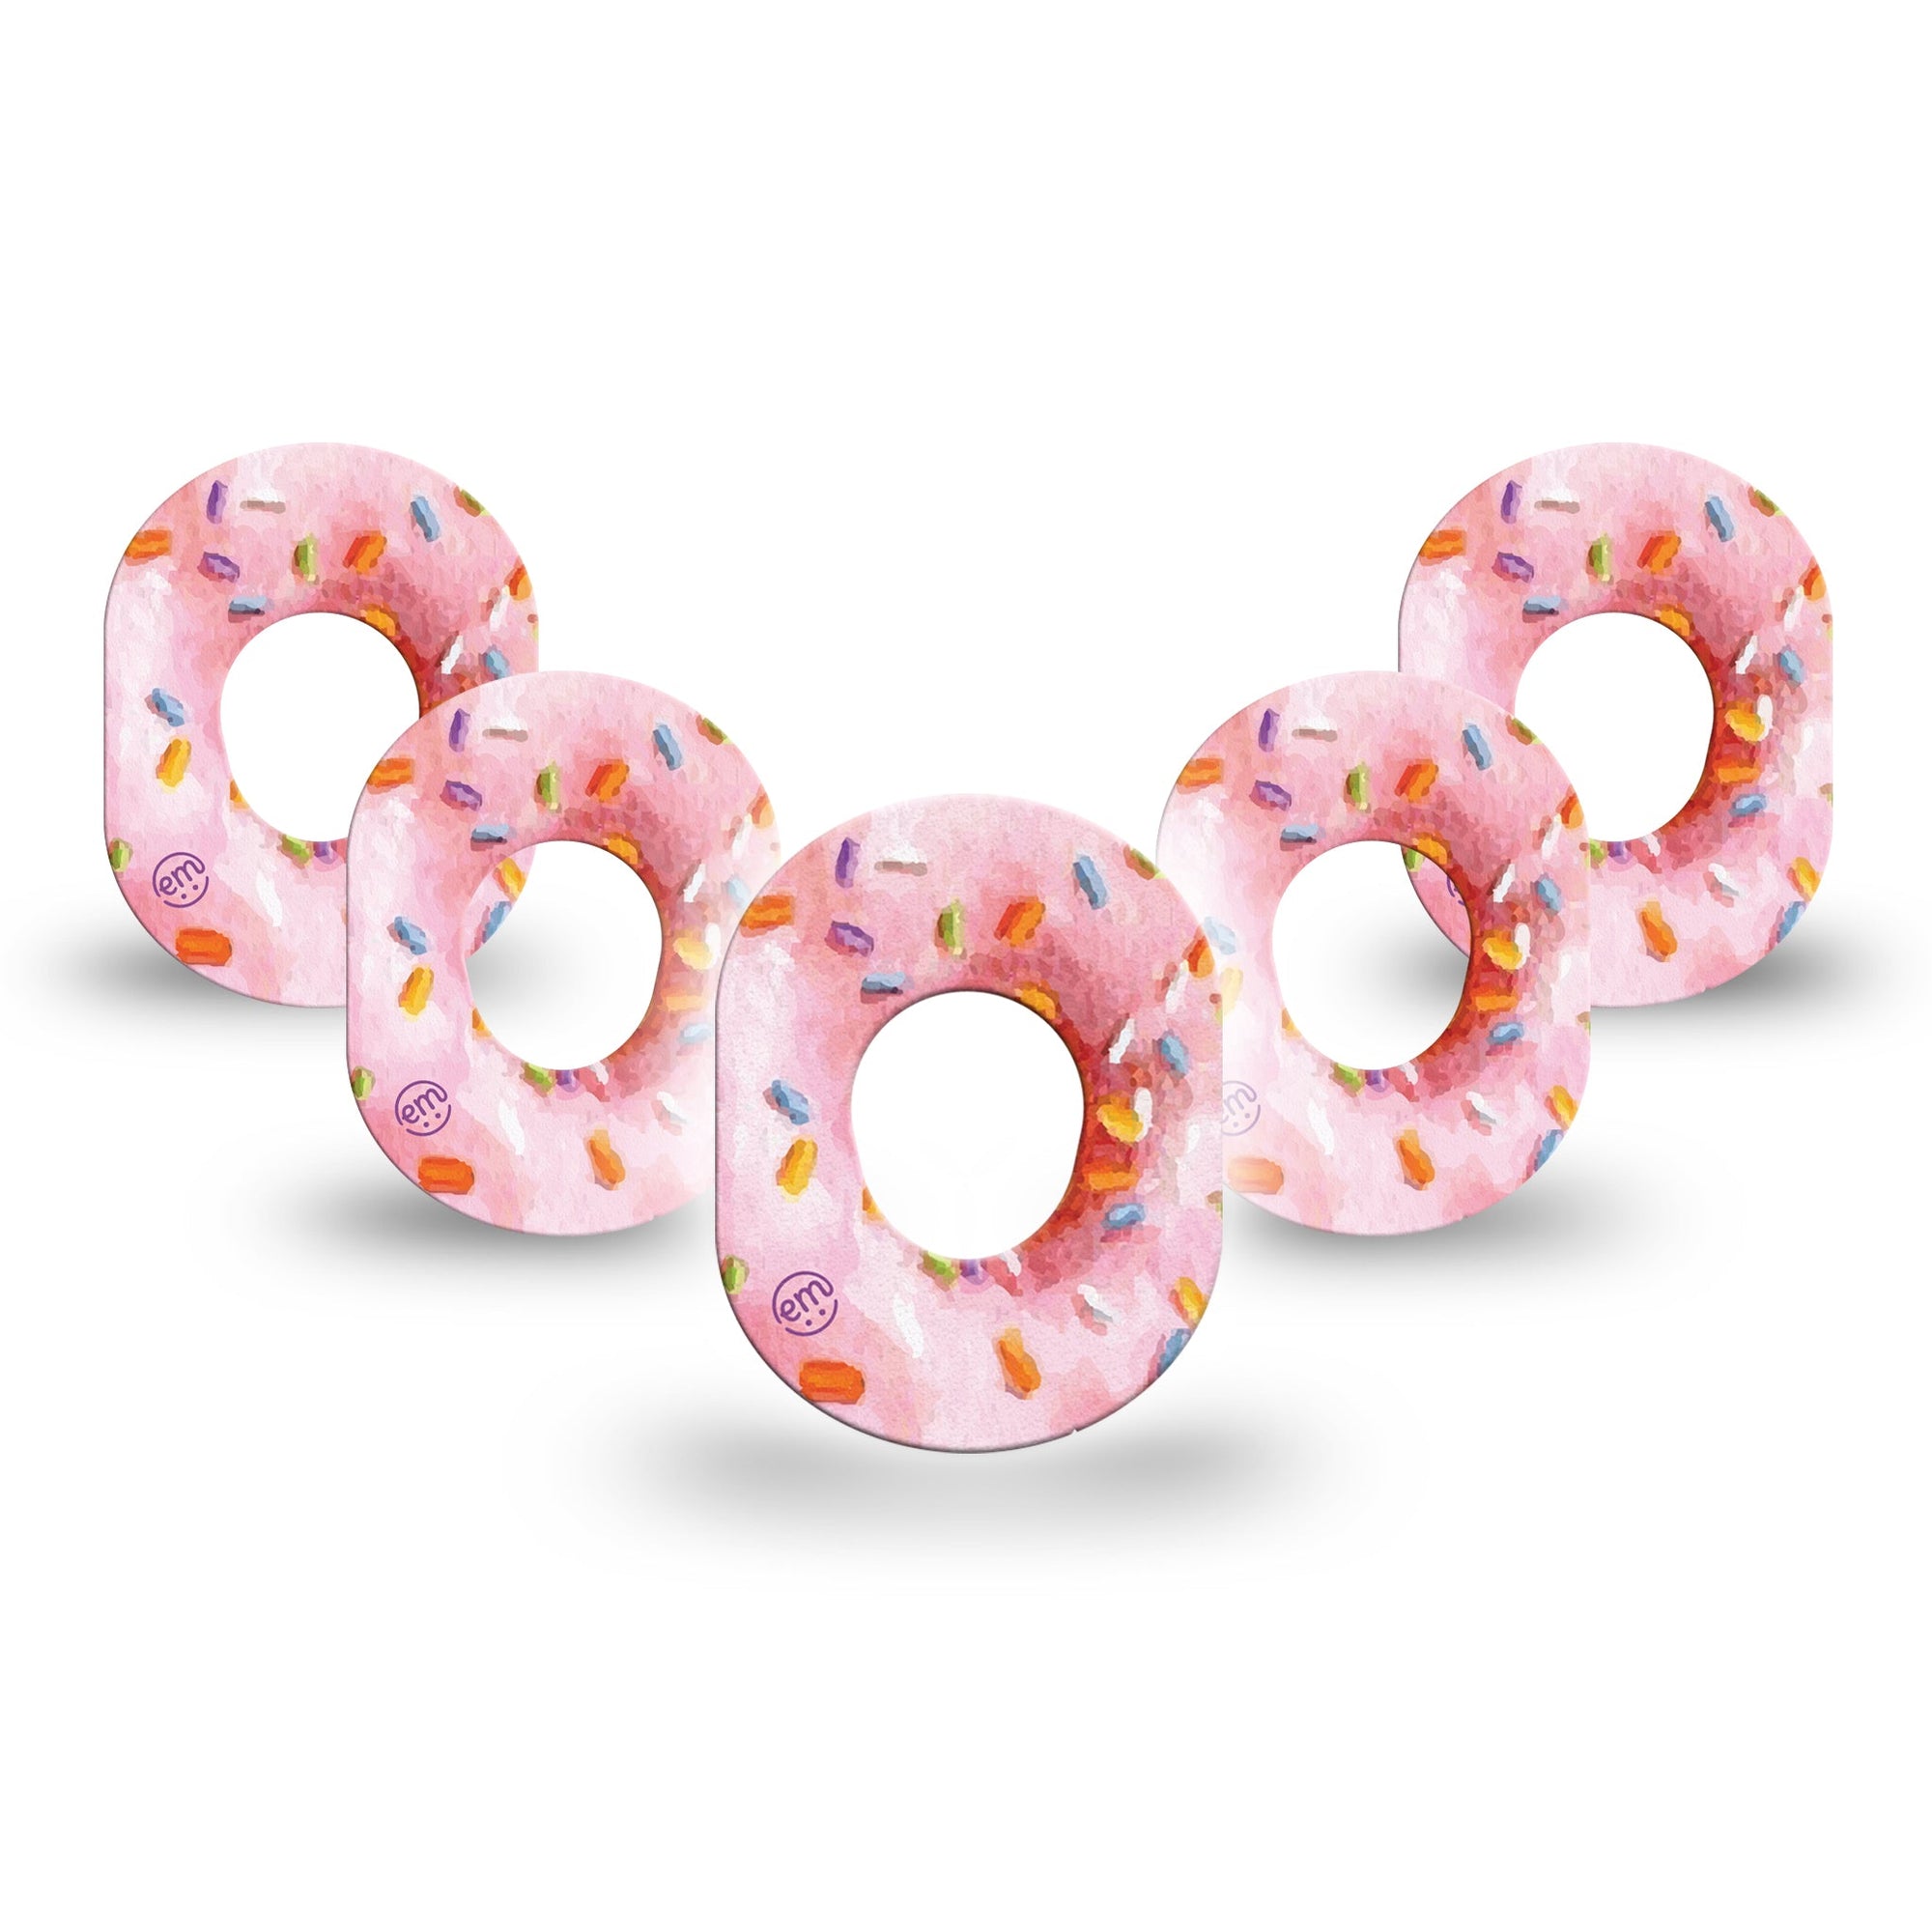 ExpressionMed Donut Sprinkles Dexcom G7 Mini Tape 5-Pack Yummy Donuts, CGM Plaster Patch Design